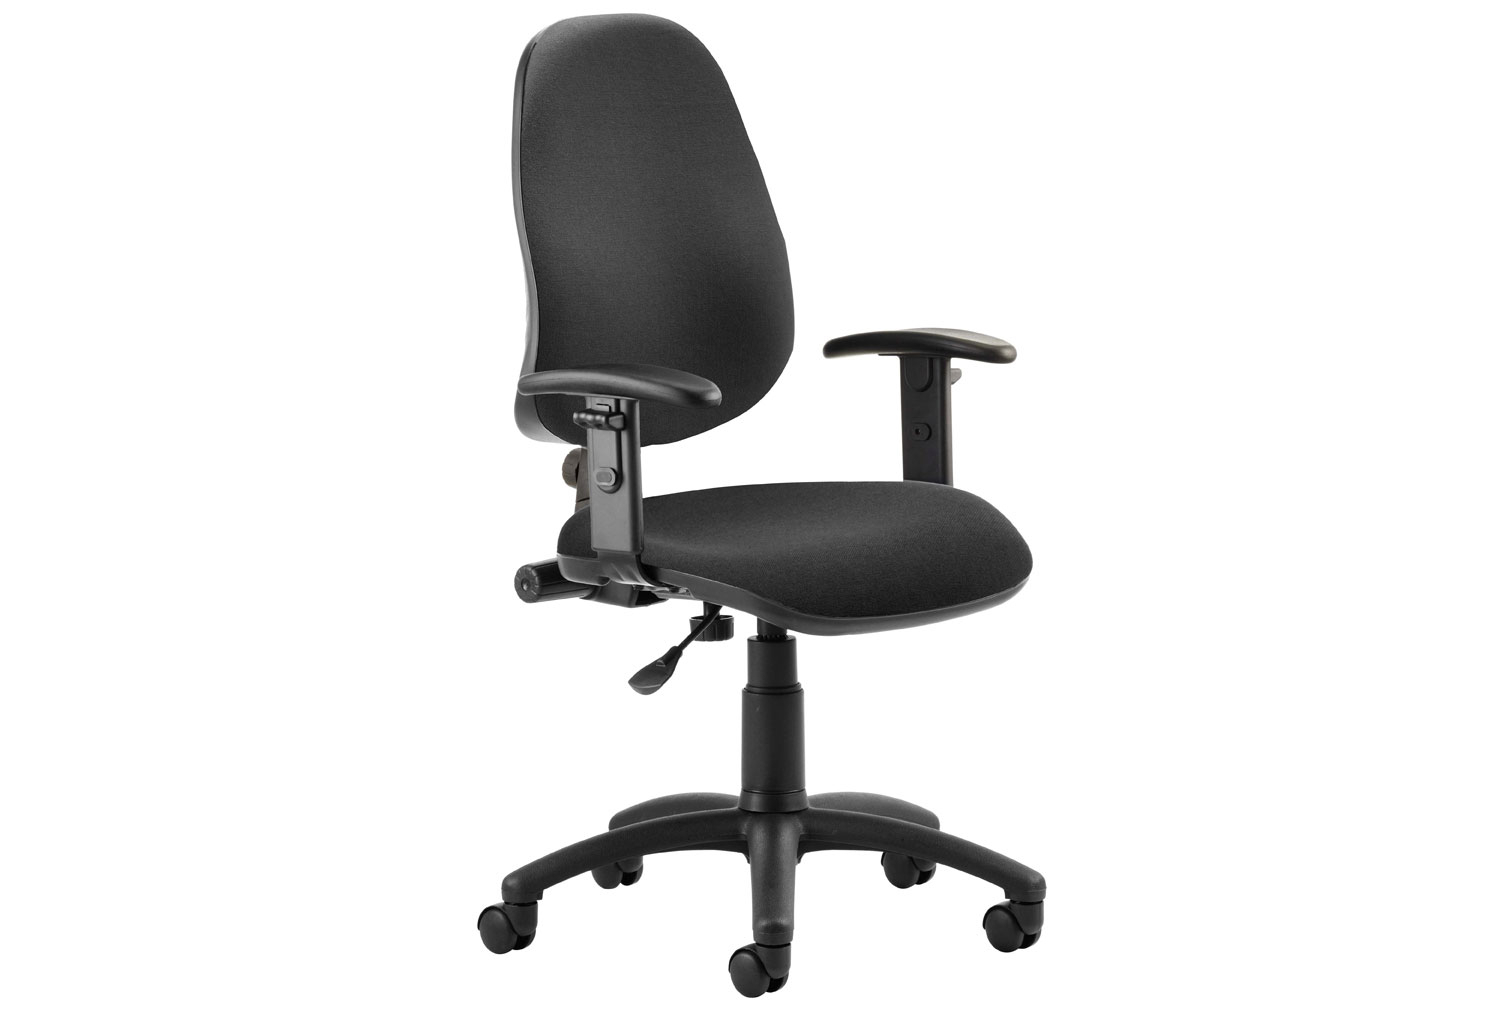 Lunar 1 Lever Operator Office Chair With Height Adjustable Arms, Black